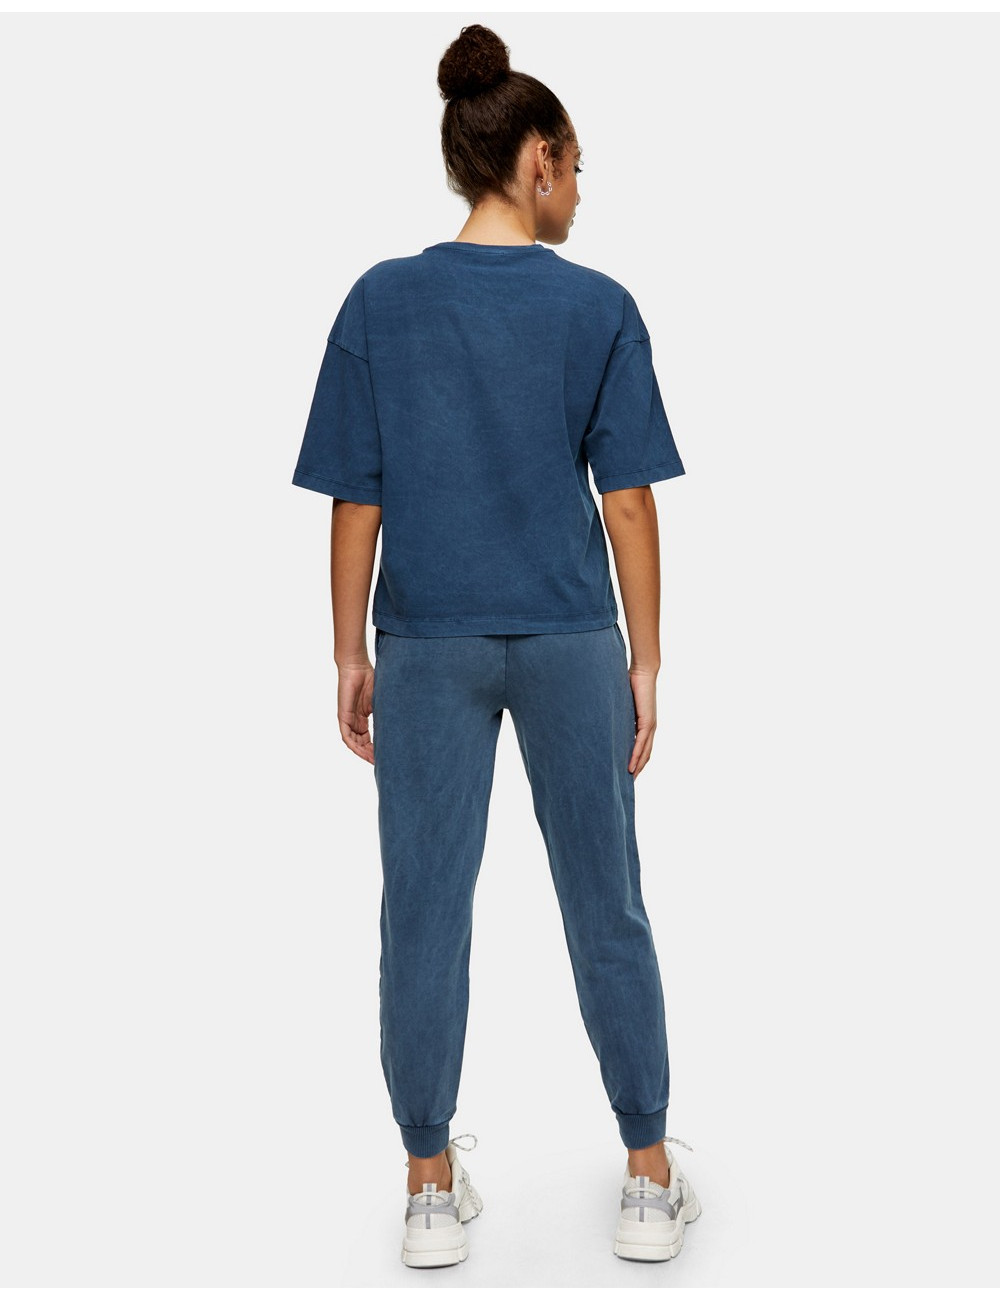 Topshop joggers in blue...